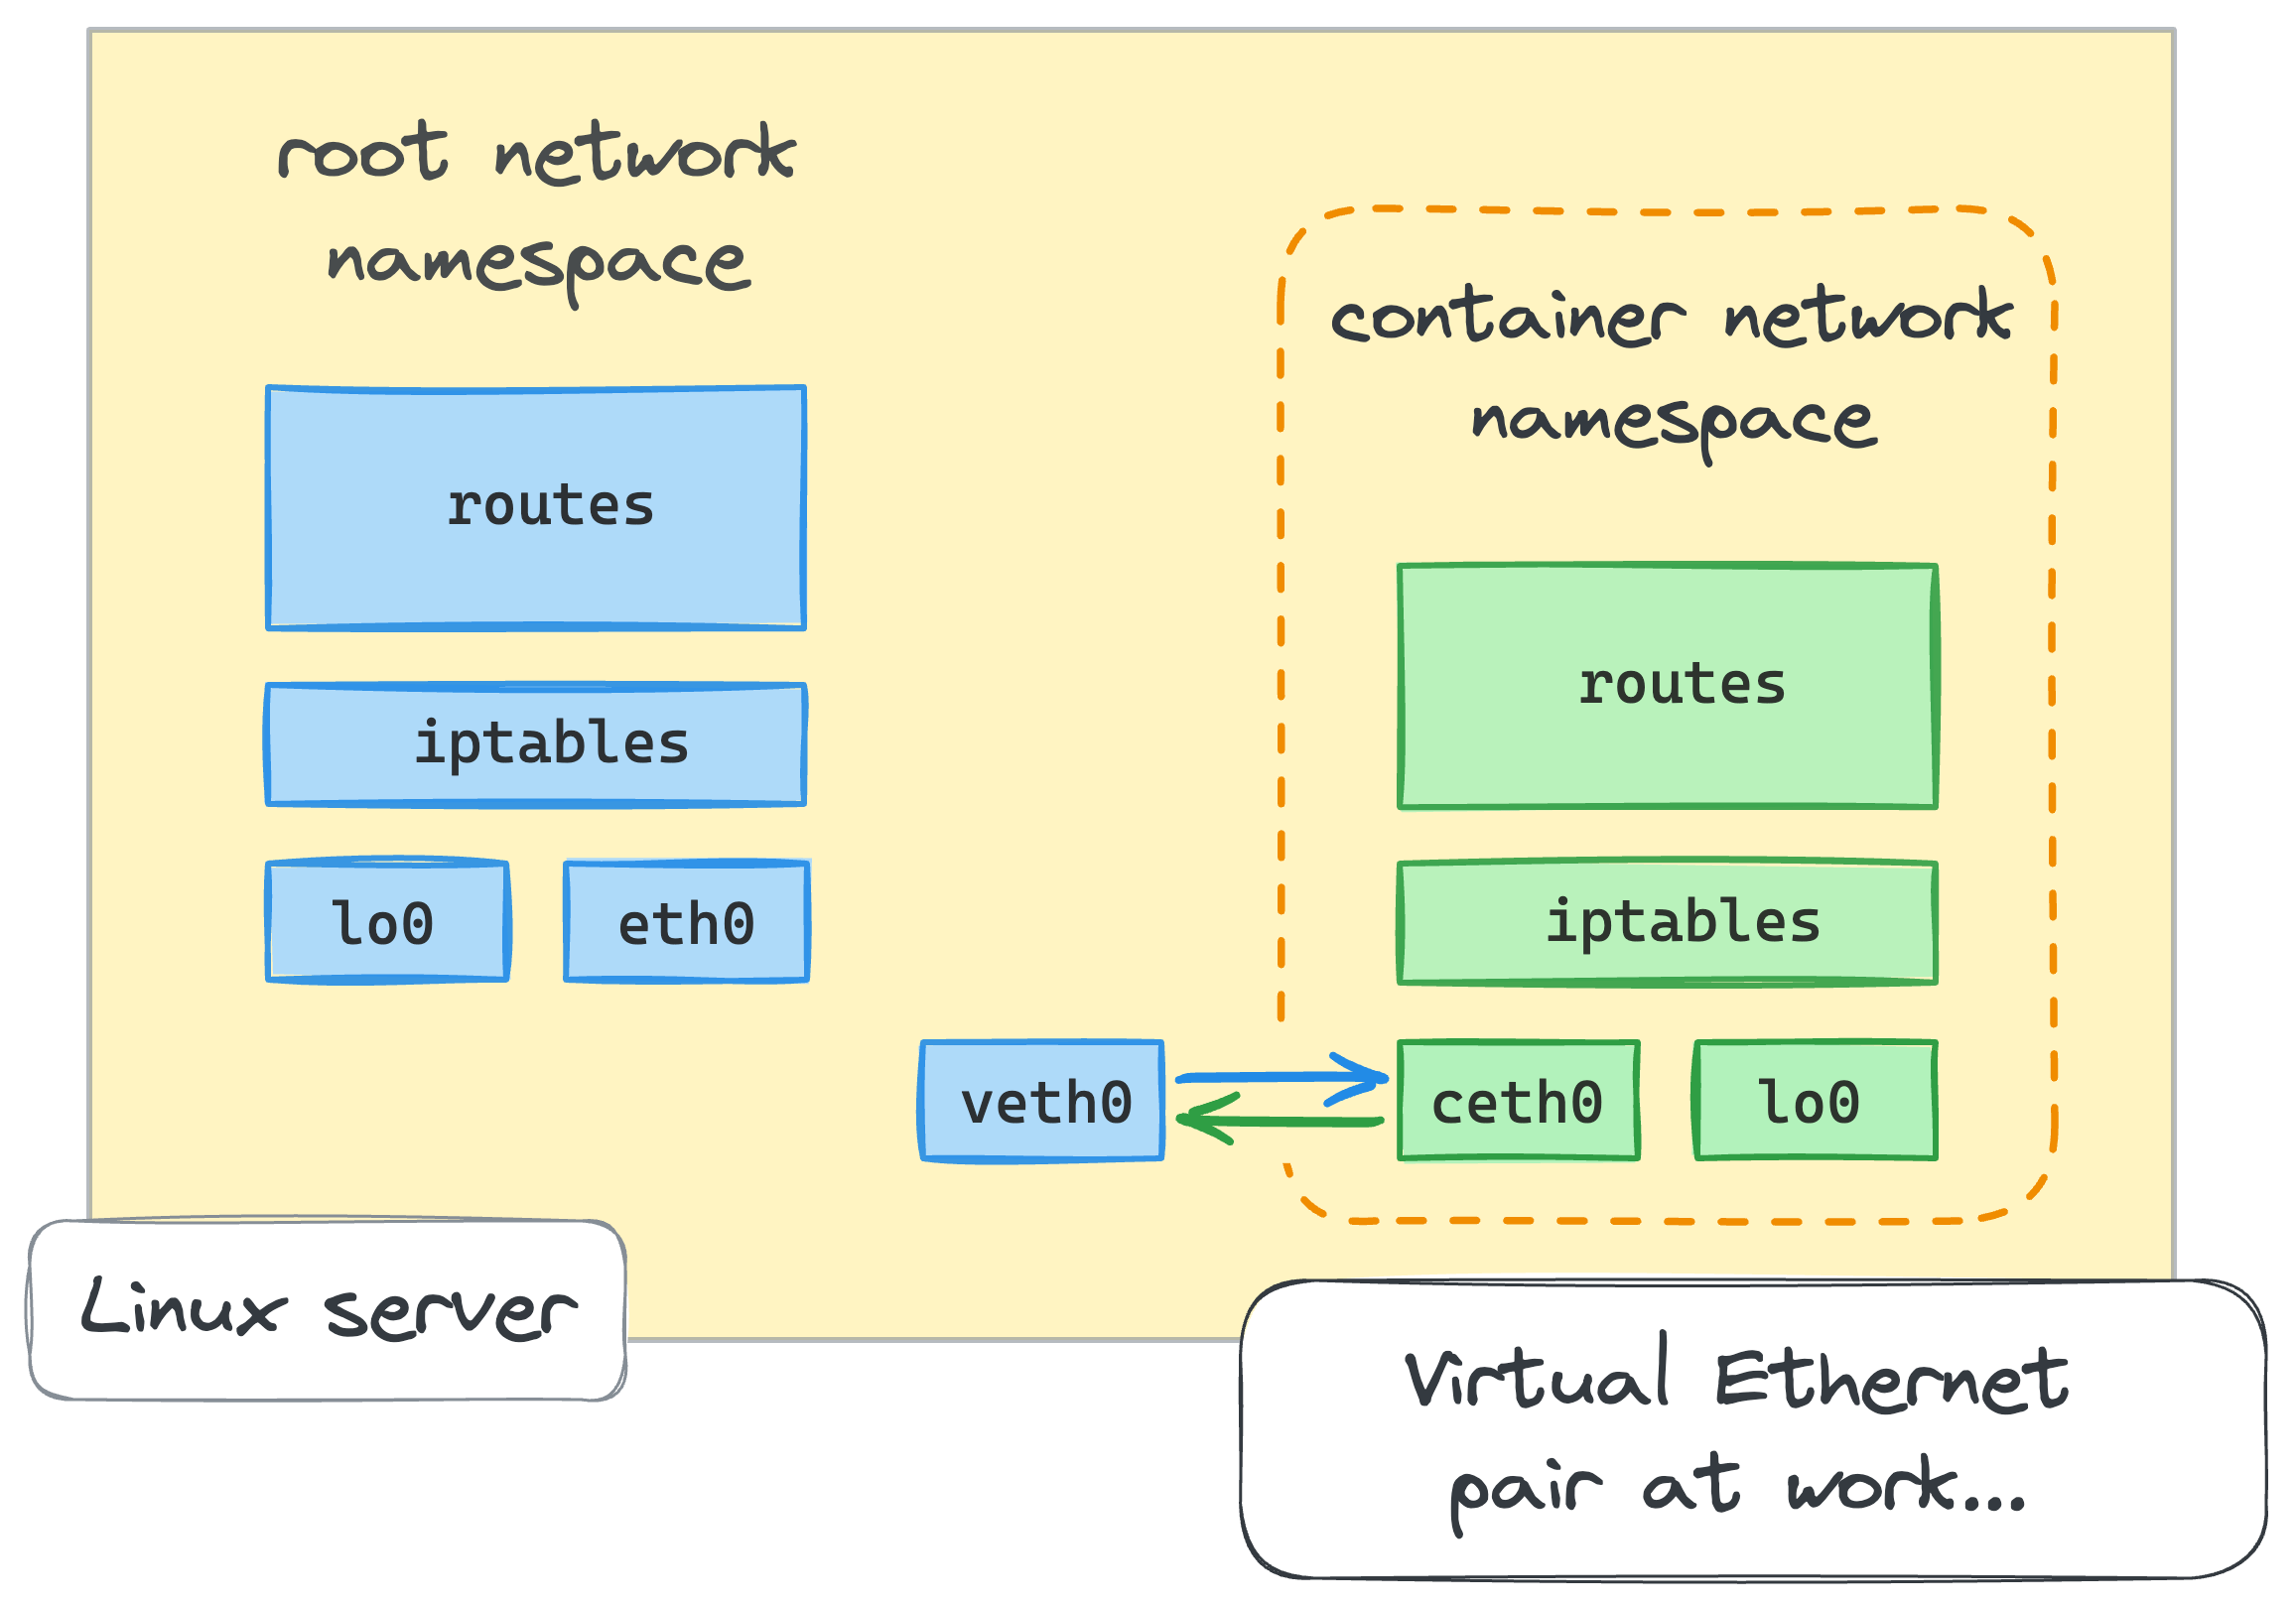 Connecting network namespaces via veth device